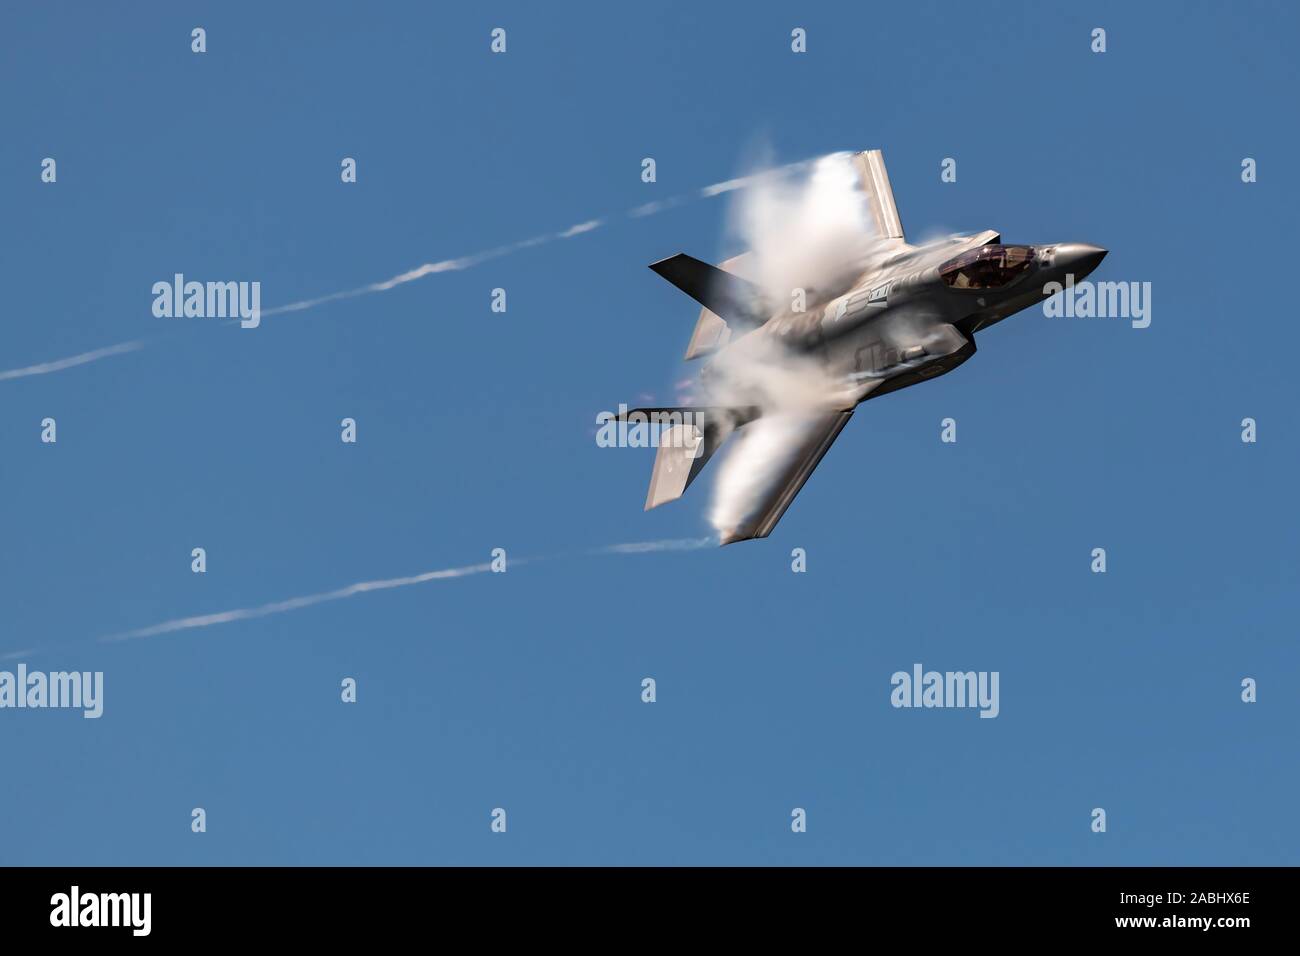 NEW WINDSOR, NY - AUGUST 2, 2019: The Lockheed Martin F-35 Lightning II from Stewart International Airport during the New York Airshow. Stock Photo